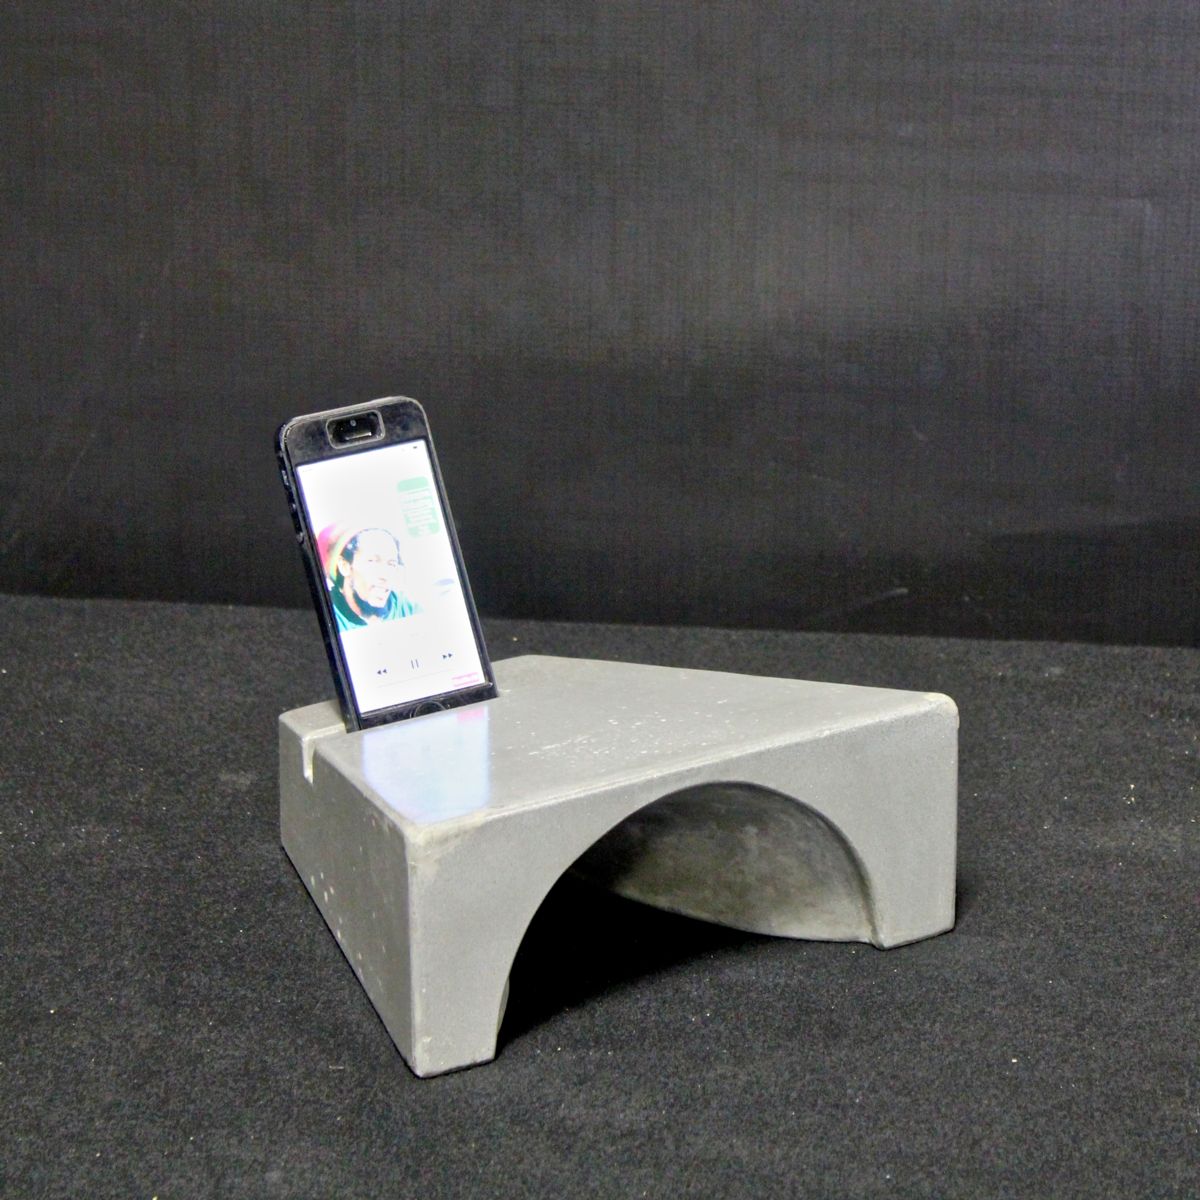 FIRST PLACE Amplif-i Concrete iPhone Dock Jonathan Haywood of Epic Artisan Concrete St Petersburg, Florida The Amplif-i Concrete iPhone dock uses natural acoustic amplification for all generations of iPhone.